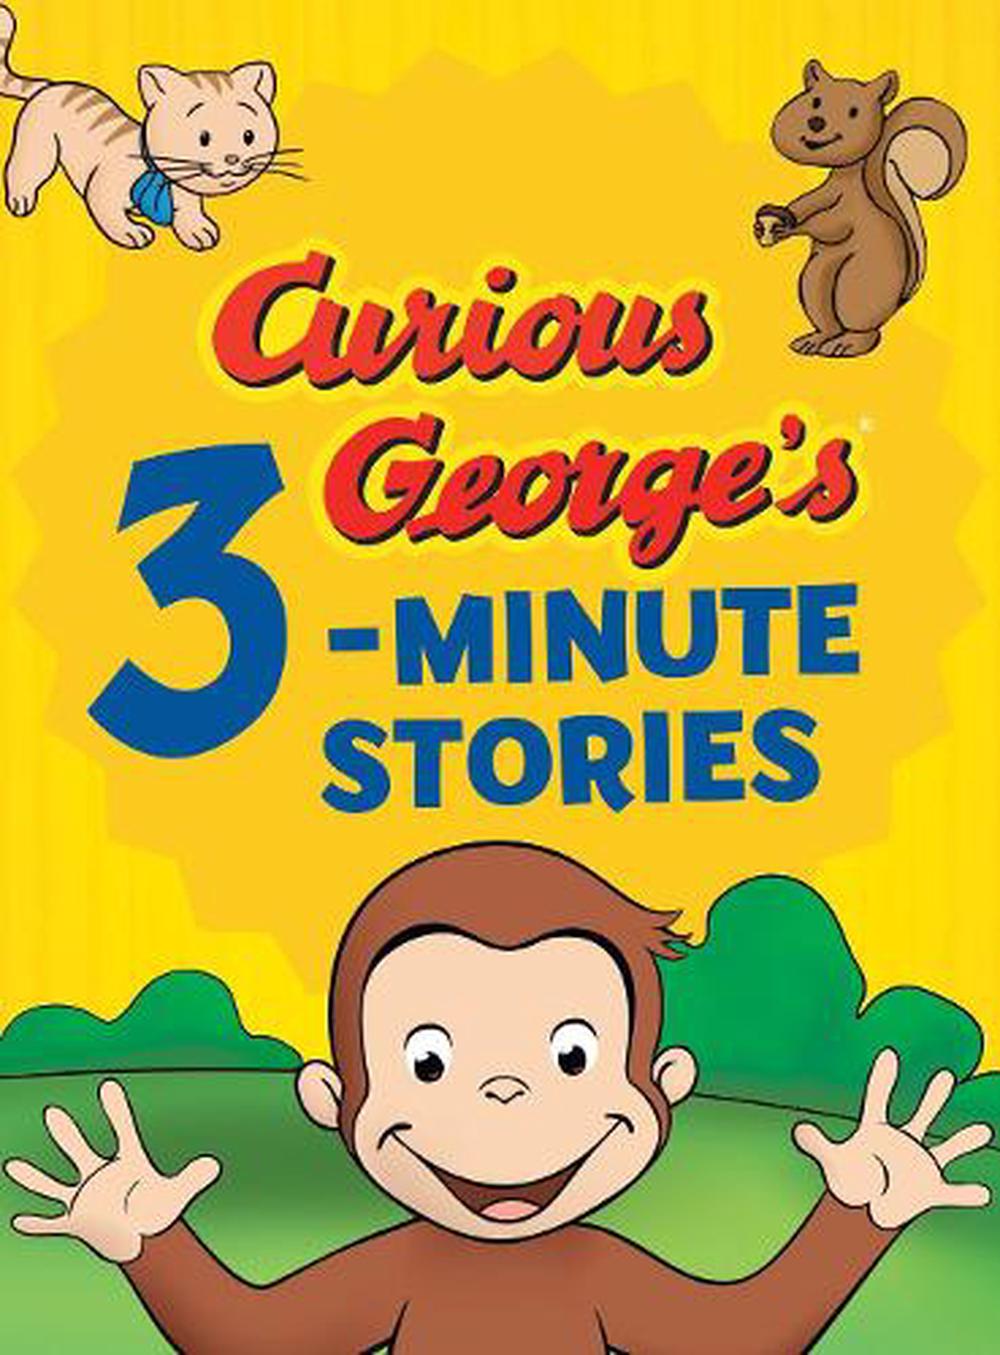 at　Curious　by　The　Rey,　9780358354352　online　George's　Buy　3-minute　Stories　Hardcover,　Nile